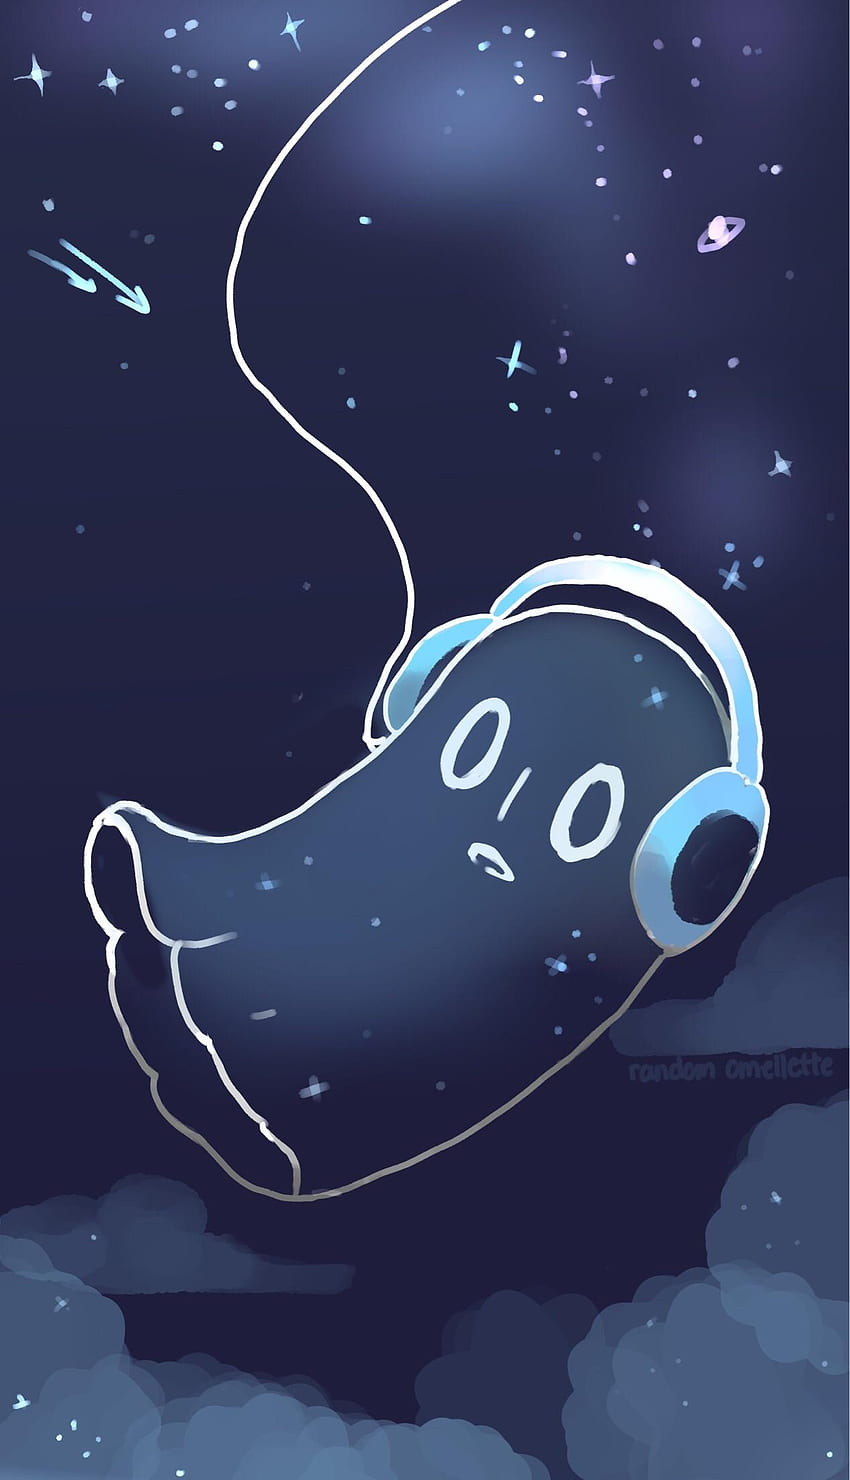 I tried making another Napstablook phone , hope you guys, Undertale HD phone wallpaper